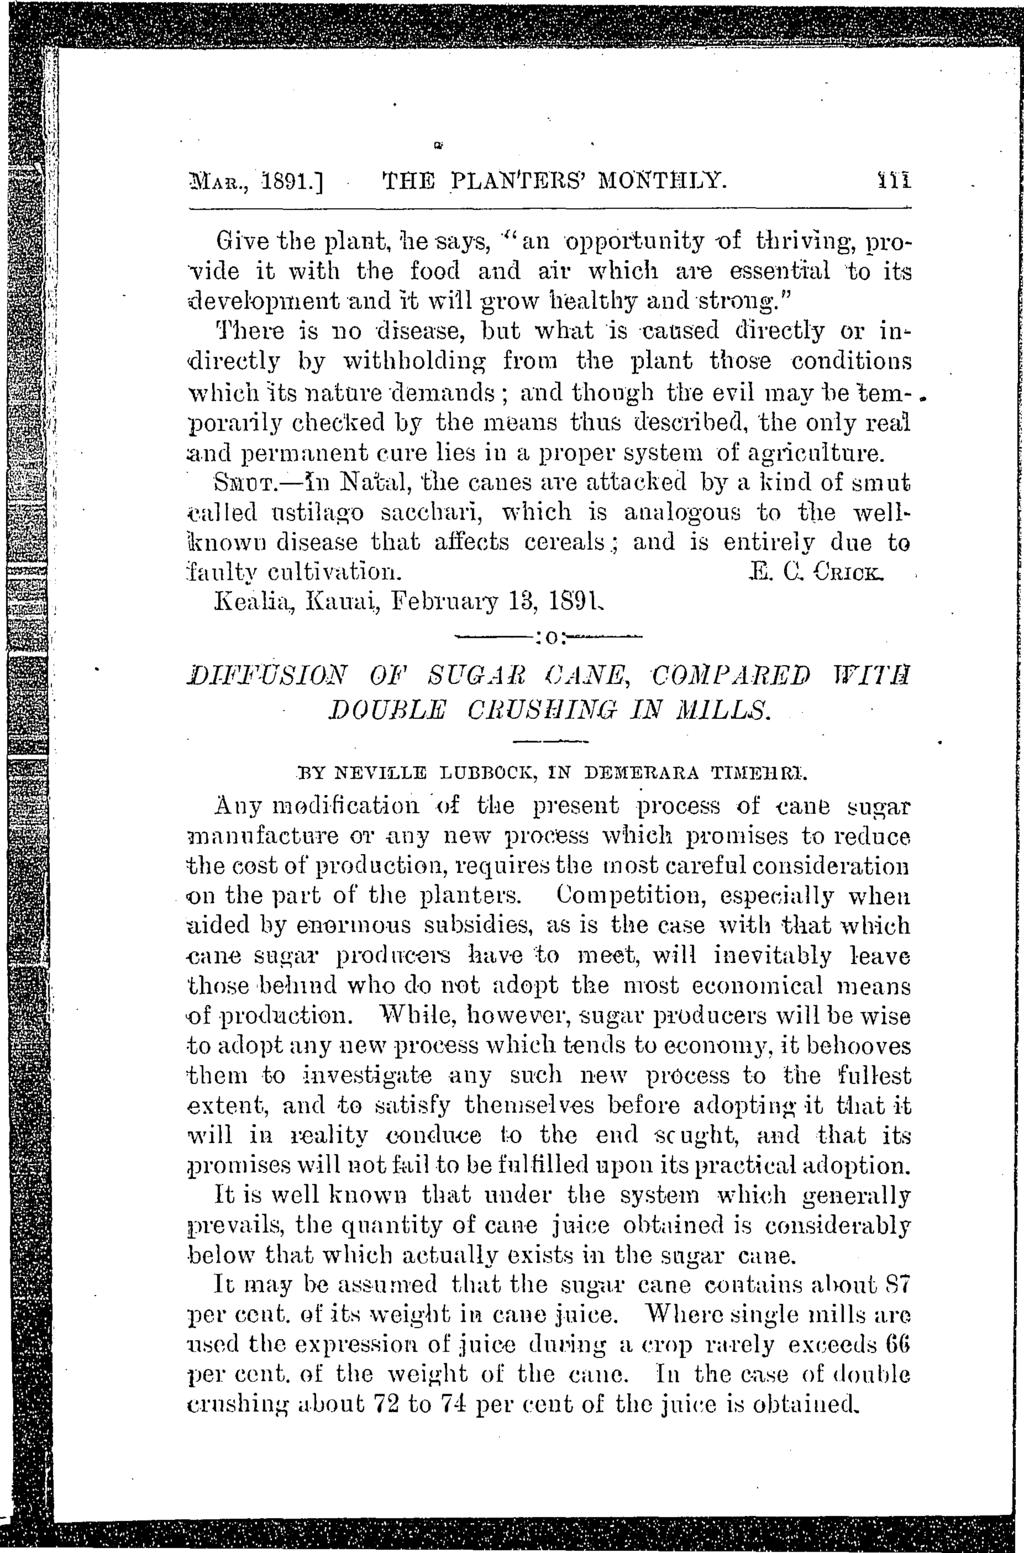 MAR., 1891.] THE PLAWrEHS' MONTHLY. Give the plant, he says,,(, an opportunity 'of Ull'ivlng, pro 'vide it with the food and air which are essentia,l to its devel'opl1lentalld J.